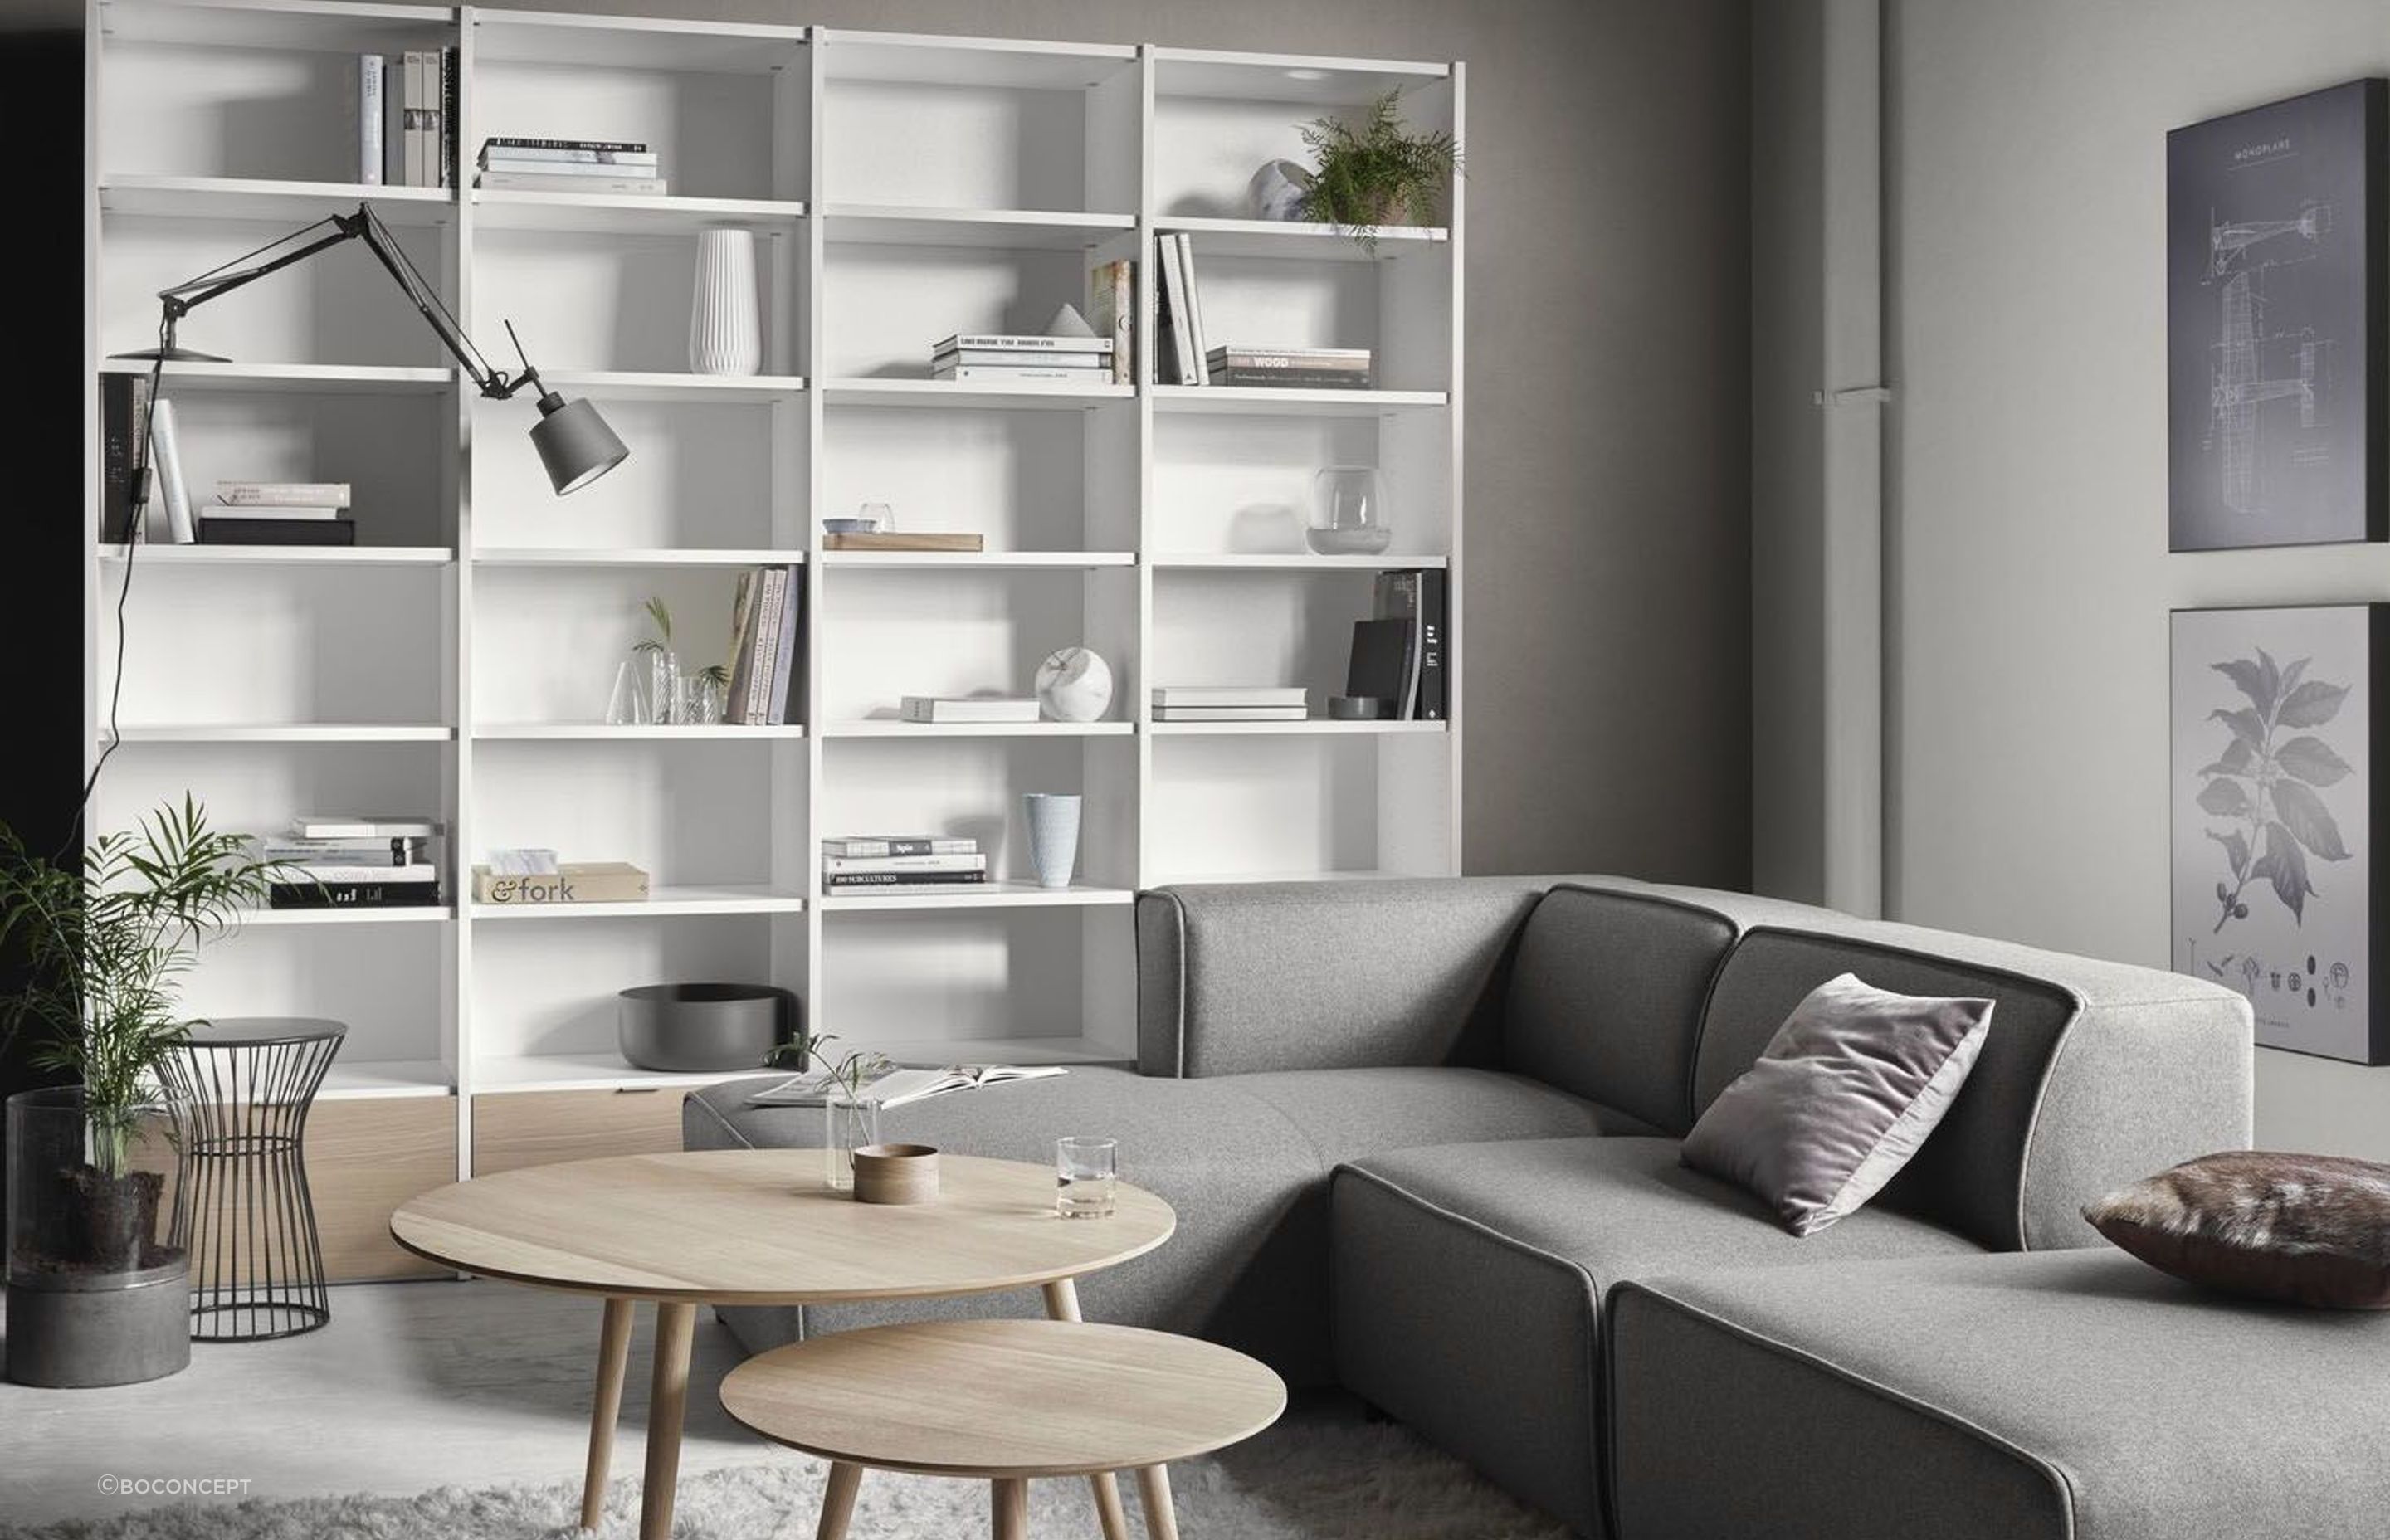 A clean and minimalist approach with the Copenhagen Wall System.